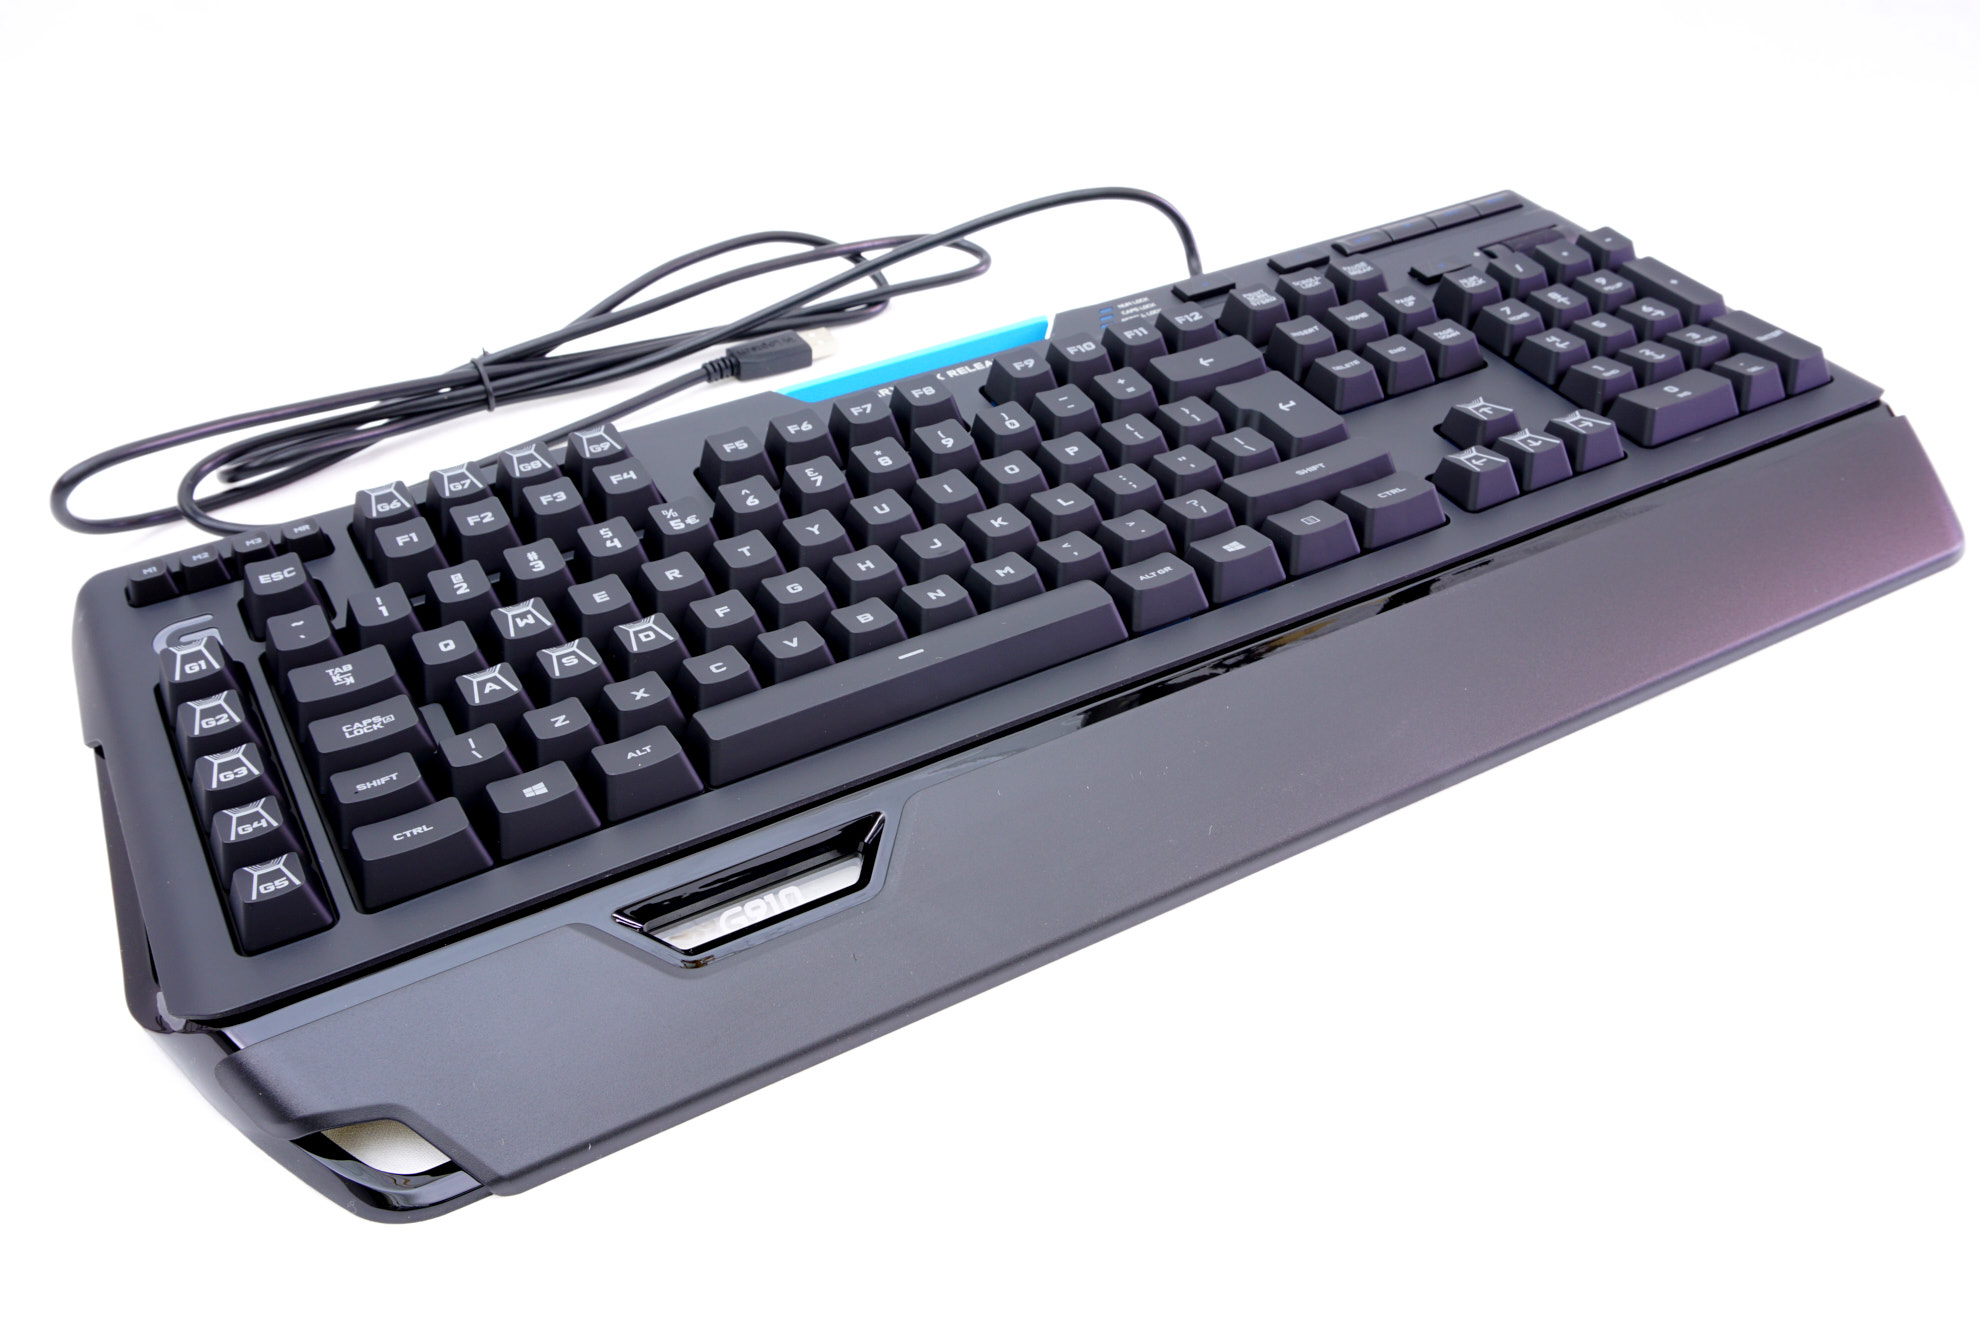 The Logitech G910 Orion Spectrum Mechanical Gaming Keyboard - The 